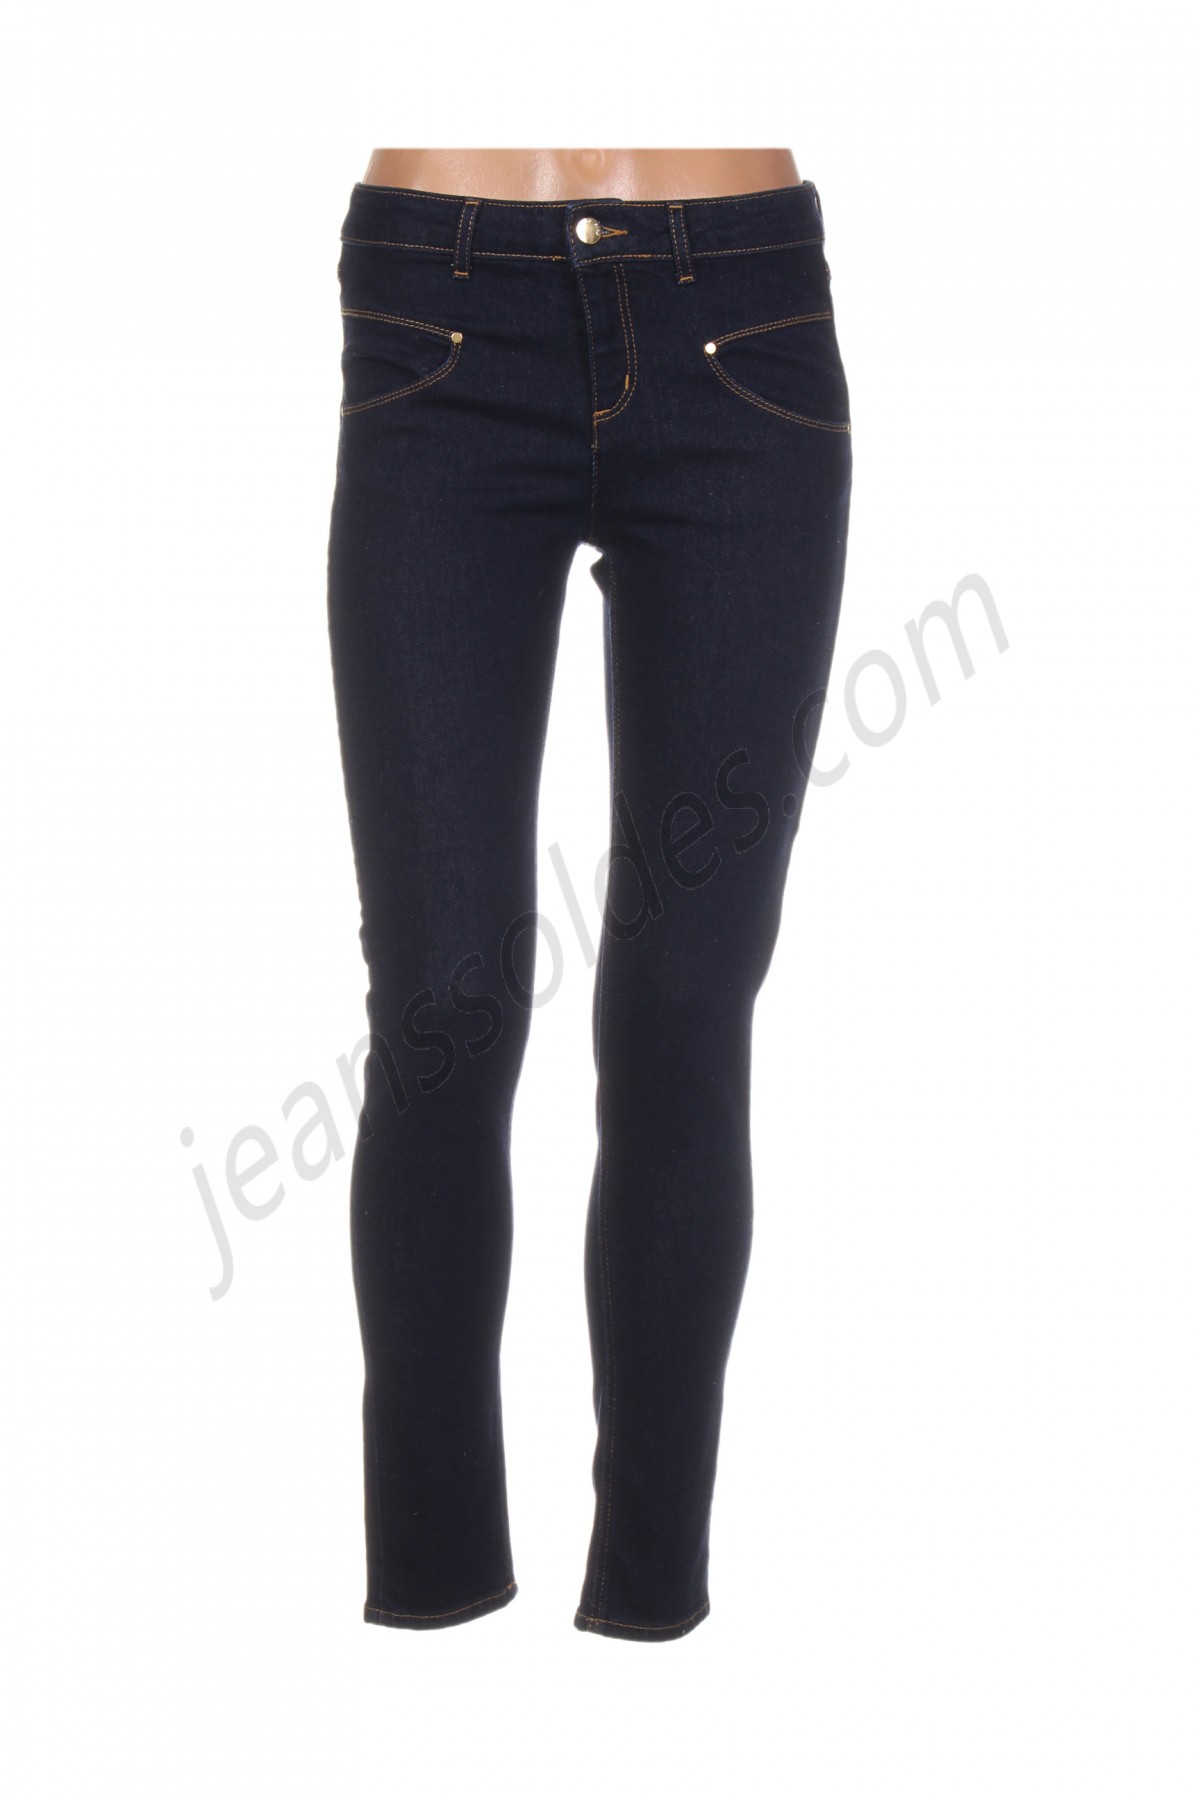 one step-Jeans coupe slim prix d’amis - -0